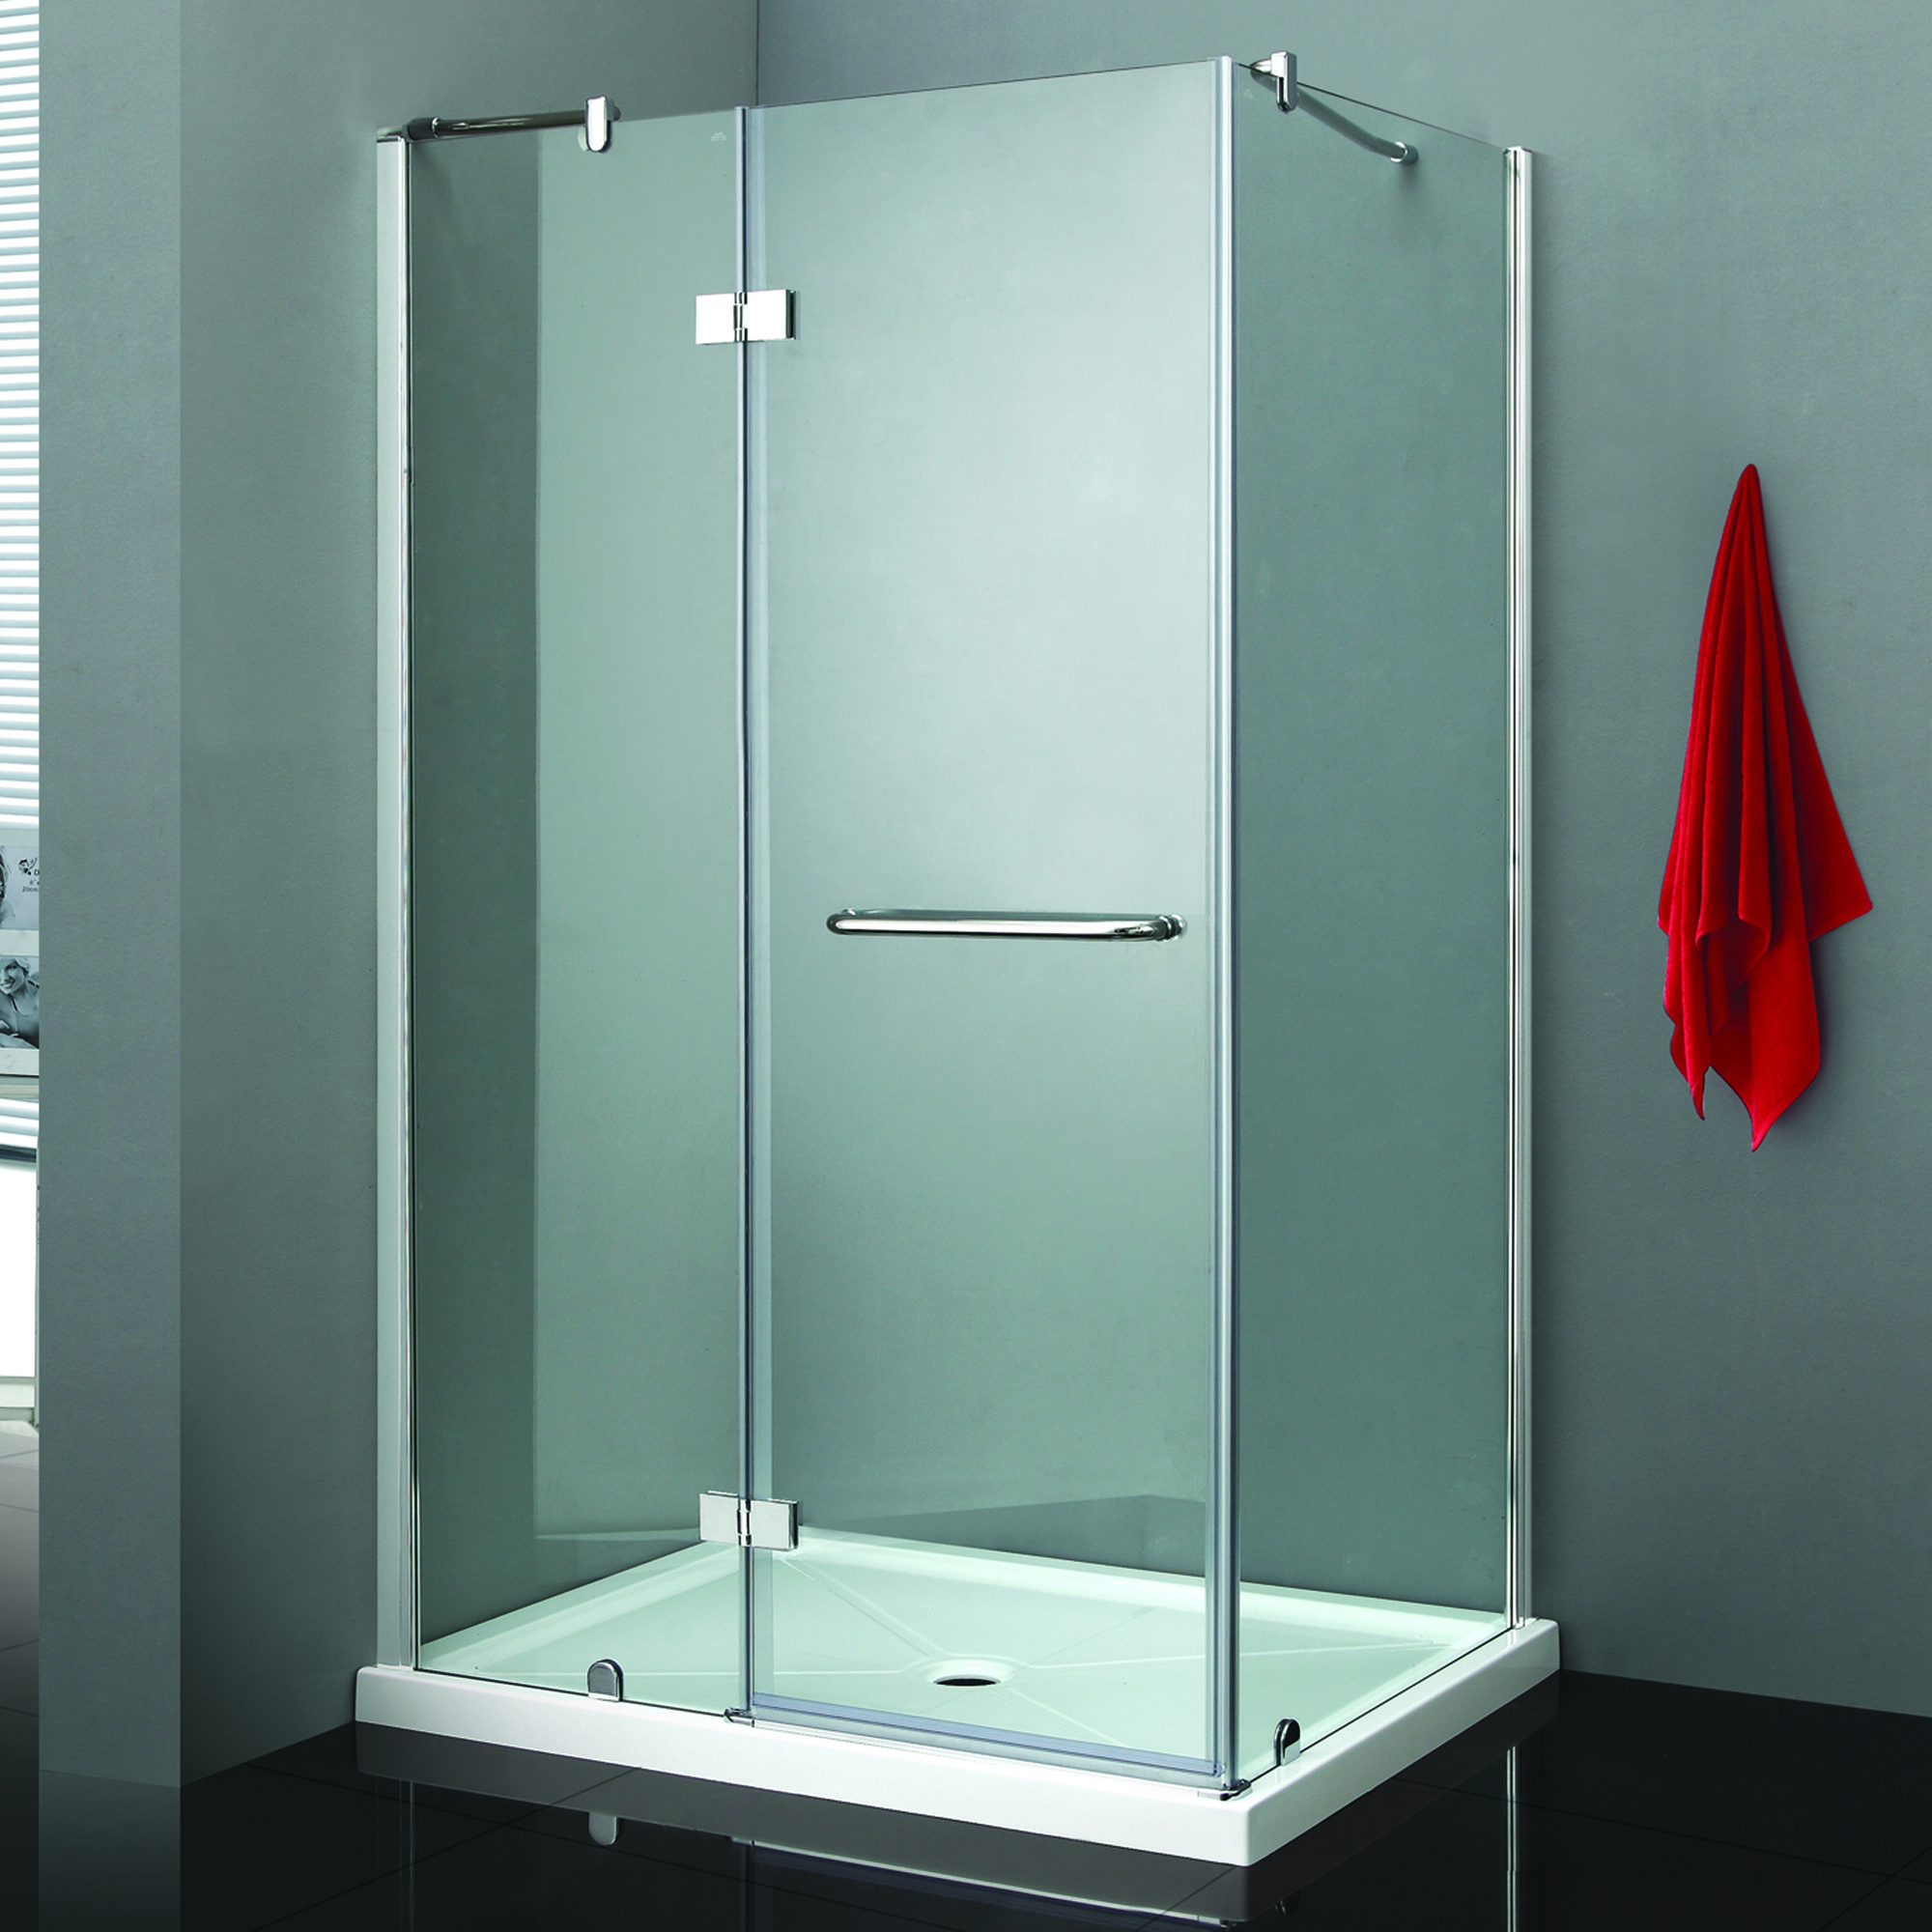 Jade Bath 6436-48-10-B Quadro Frameless Rectangle Hinged Shower Enclosure with Base Included Frame Finish: Silver, Size: 76.5 H x 48 W x 36 D